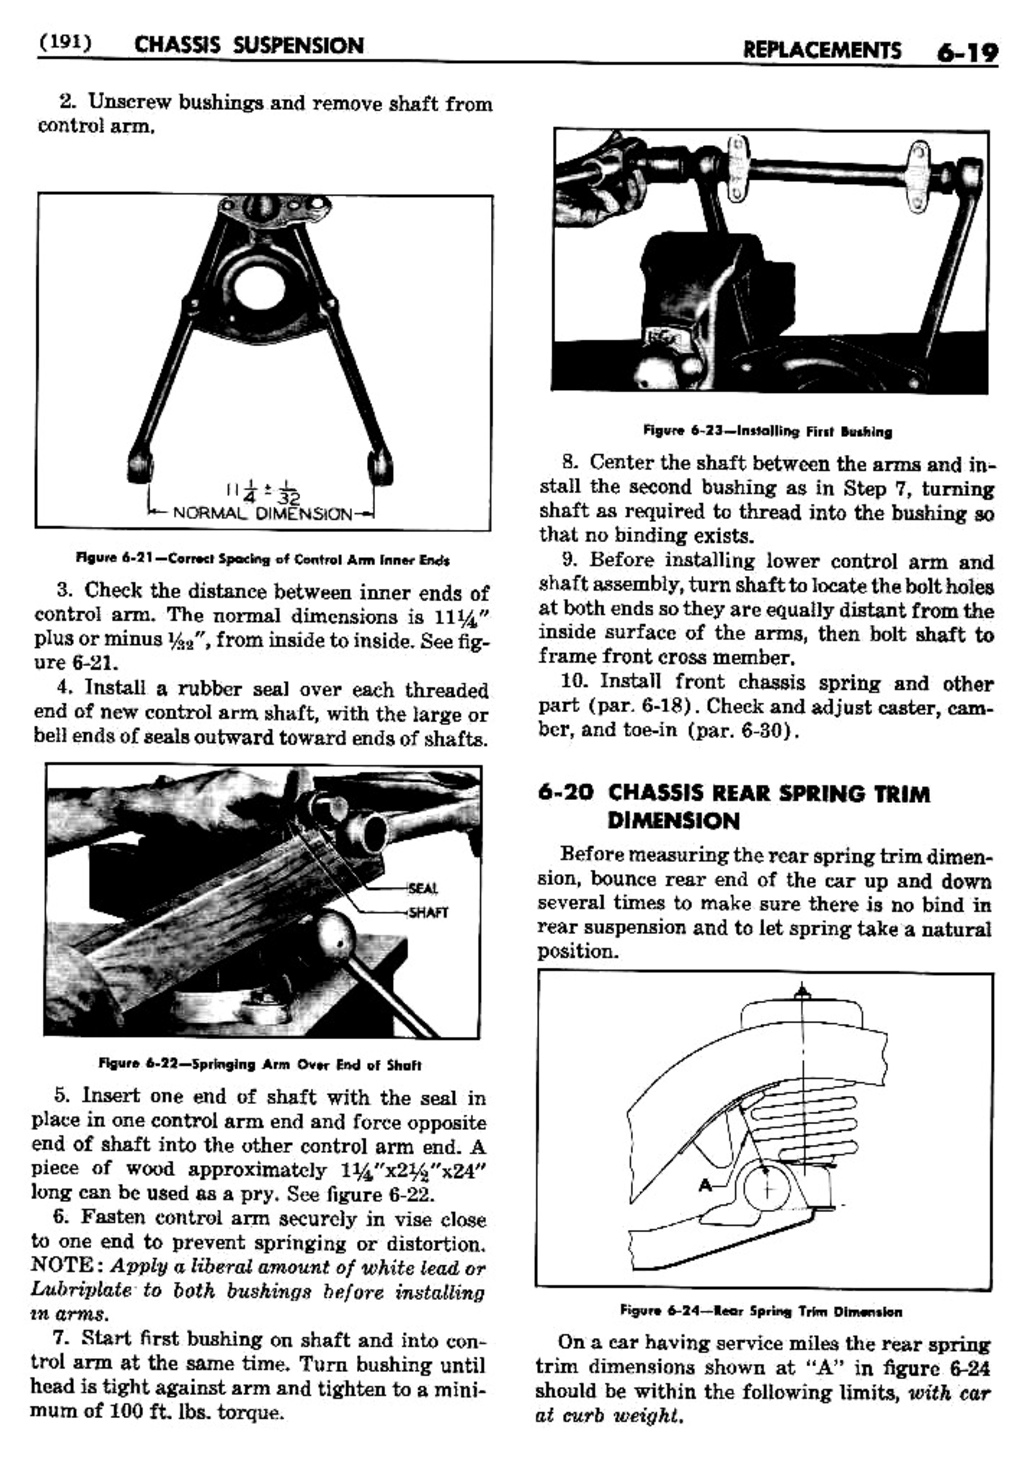 n_07 1950 Buick Shop Manual - Chassis Suspension-019-019.jpg